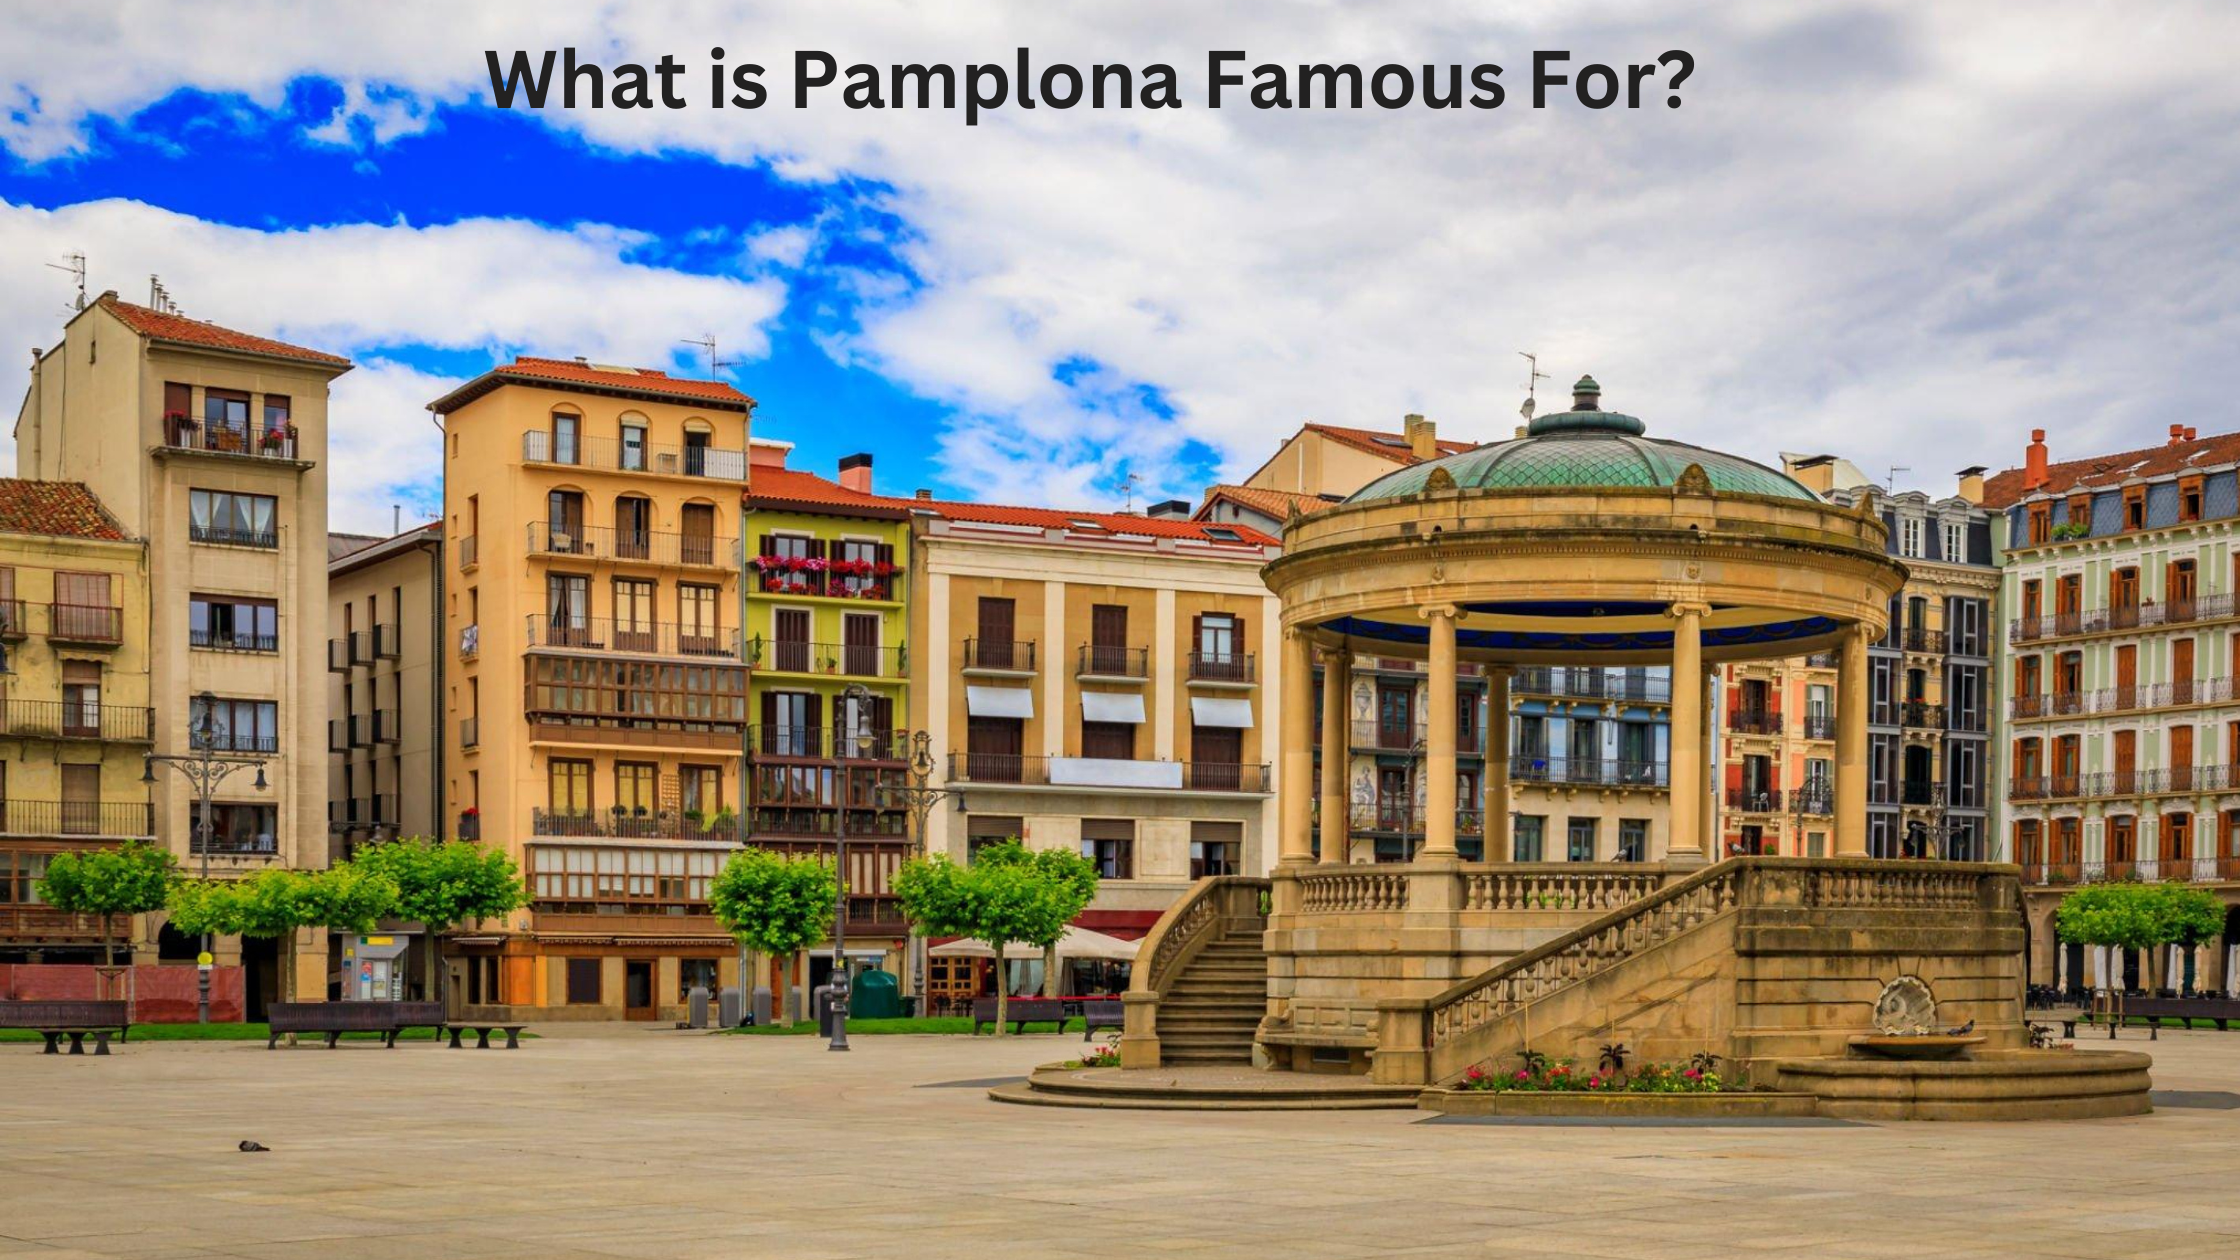 What is Pamplona Famous For